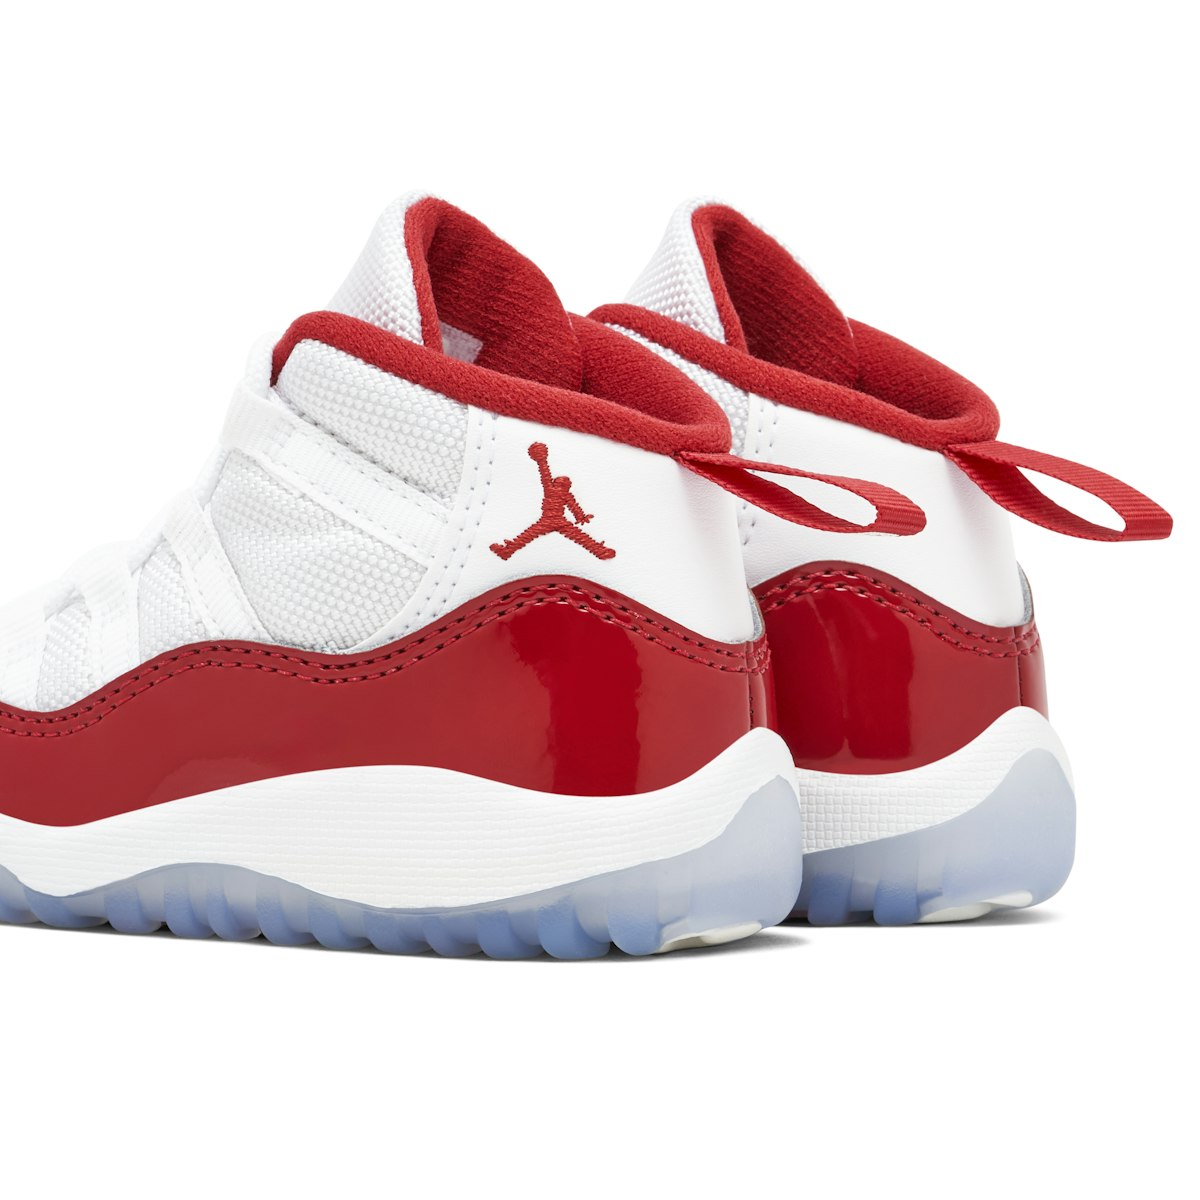  Jordan Toddler Air 11 TD 378040 116 Cherry - Size 5C :  Clothing, Shoes & Jewelry